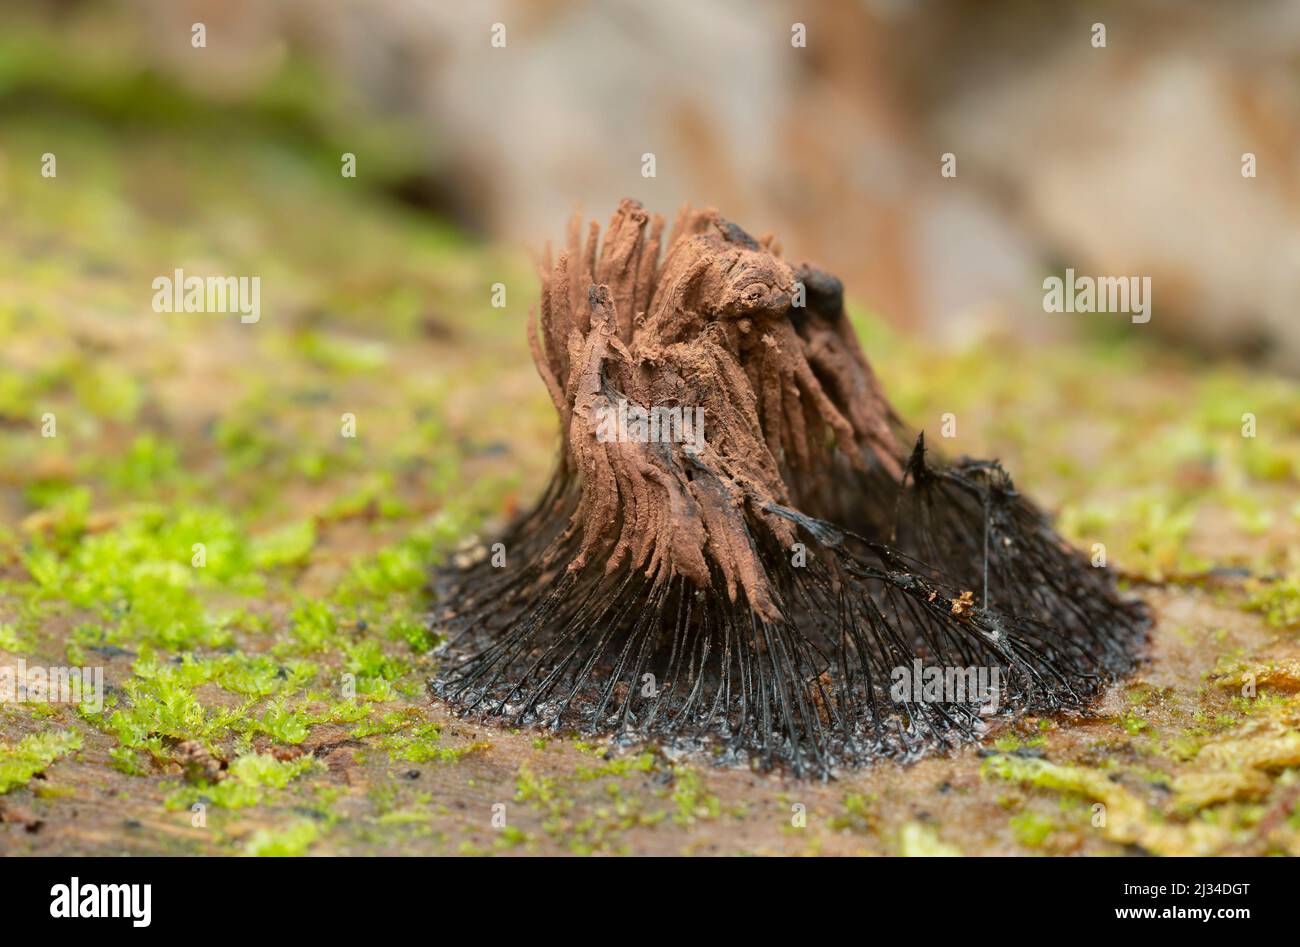 Stemonitis slime mould growing on wood Stock Photo